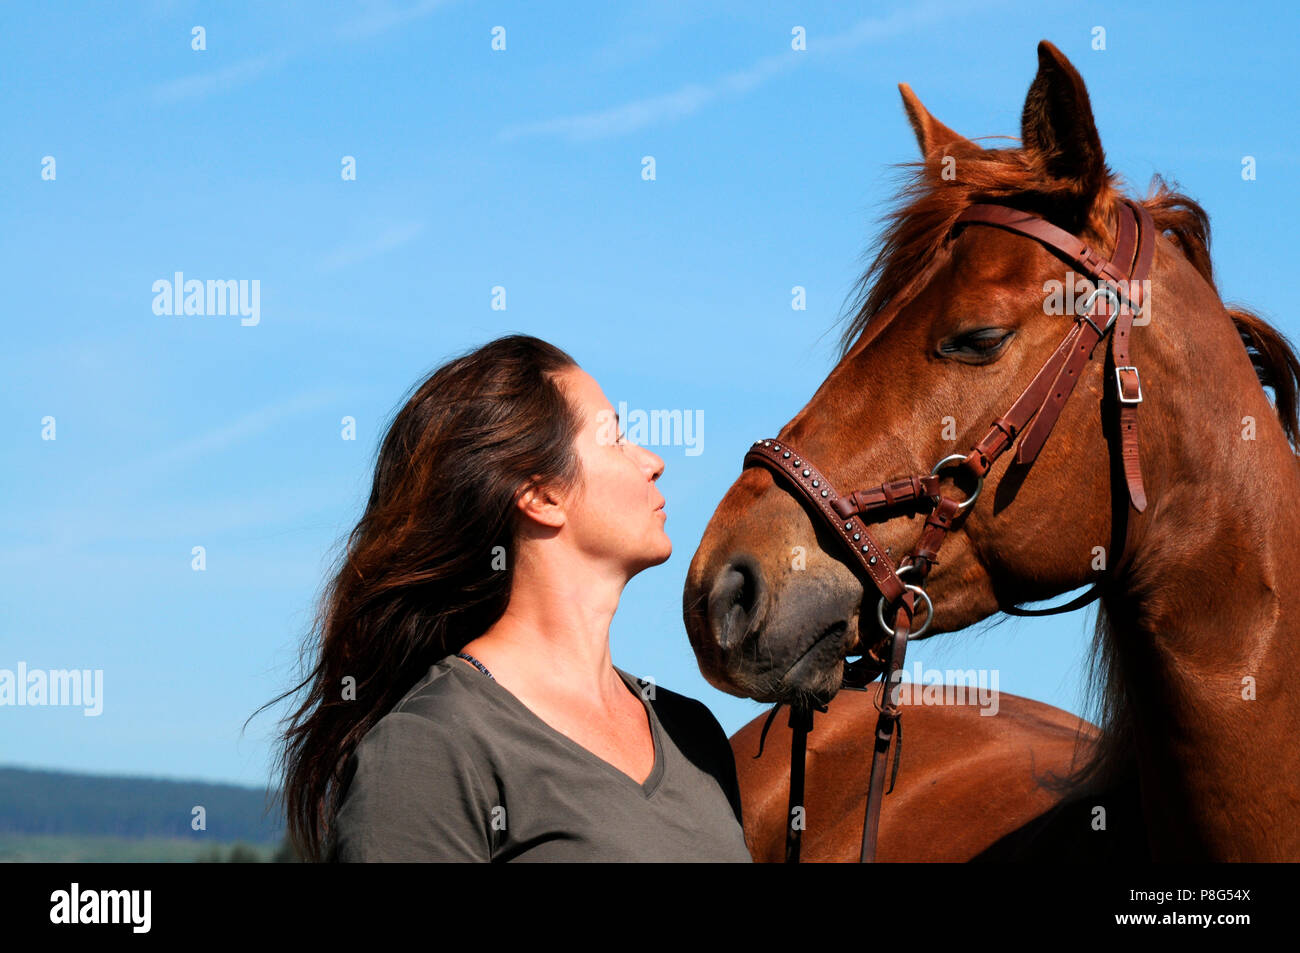 Woman and Quarter Horse, mare, sidepull, bitless bridle, sorrell Stock Photo